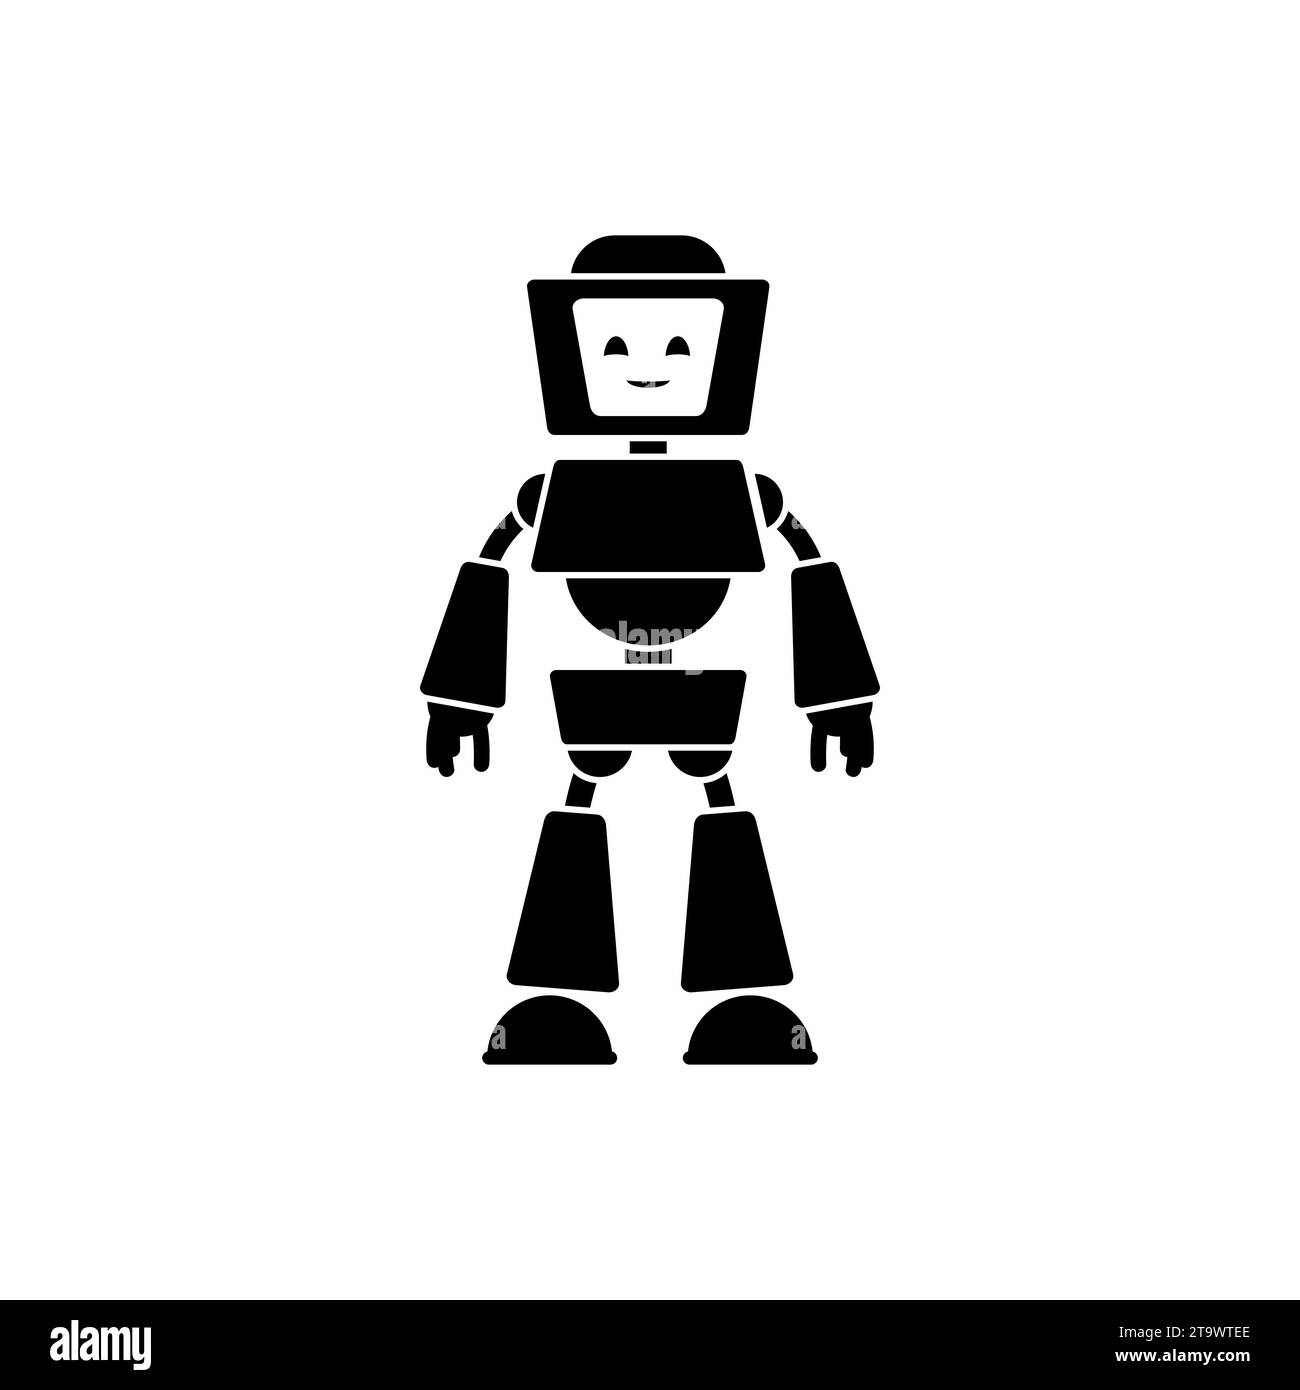 Cute robot icon isolated on white background. Funny futuristic bot with smiling friendly face and screen. Humanoid machine, Adorable cyborg symbol. Stock Vector